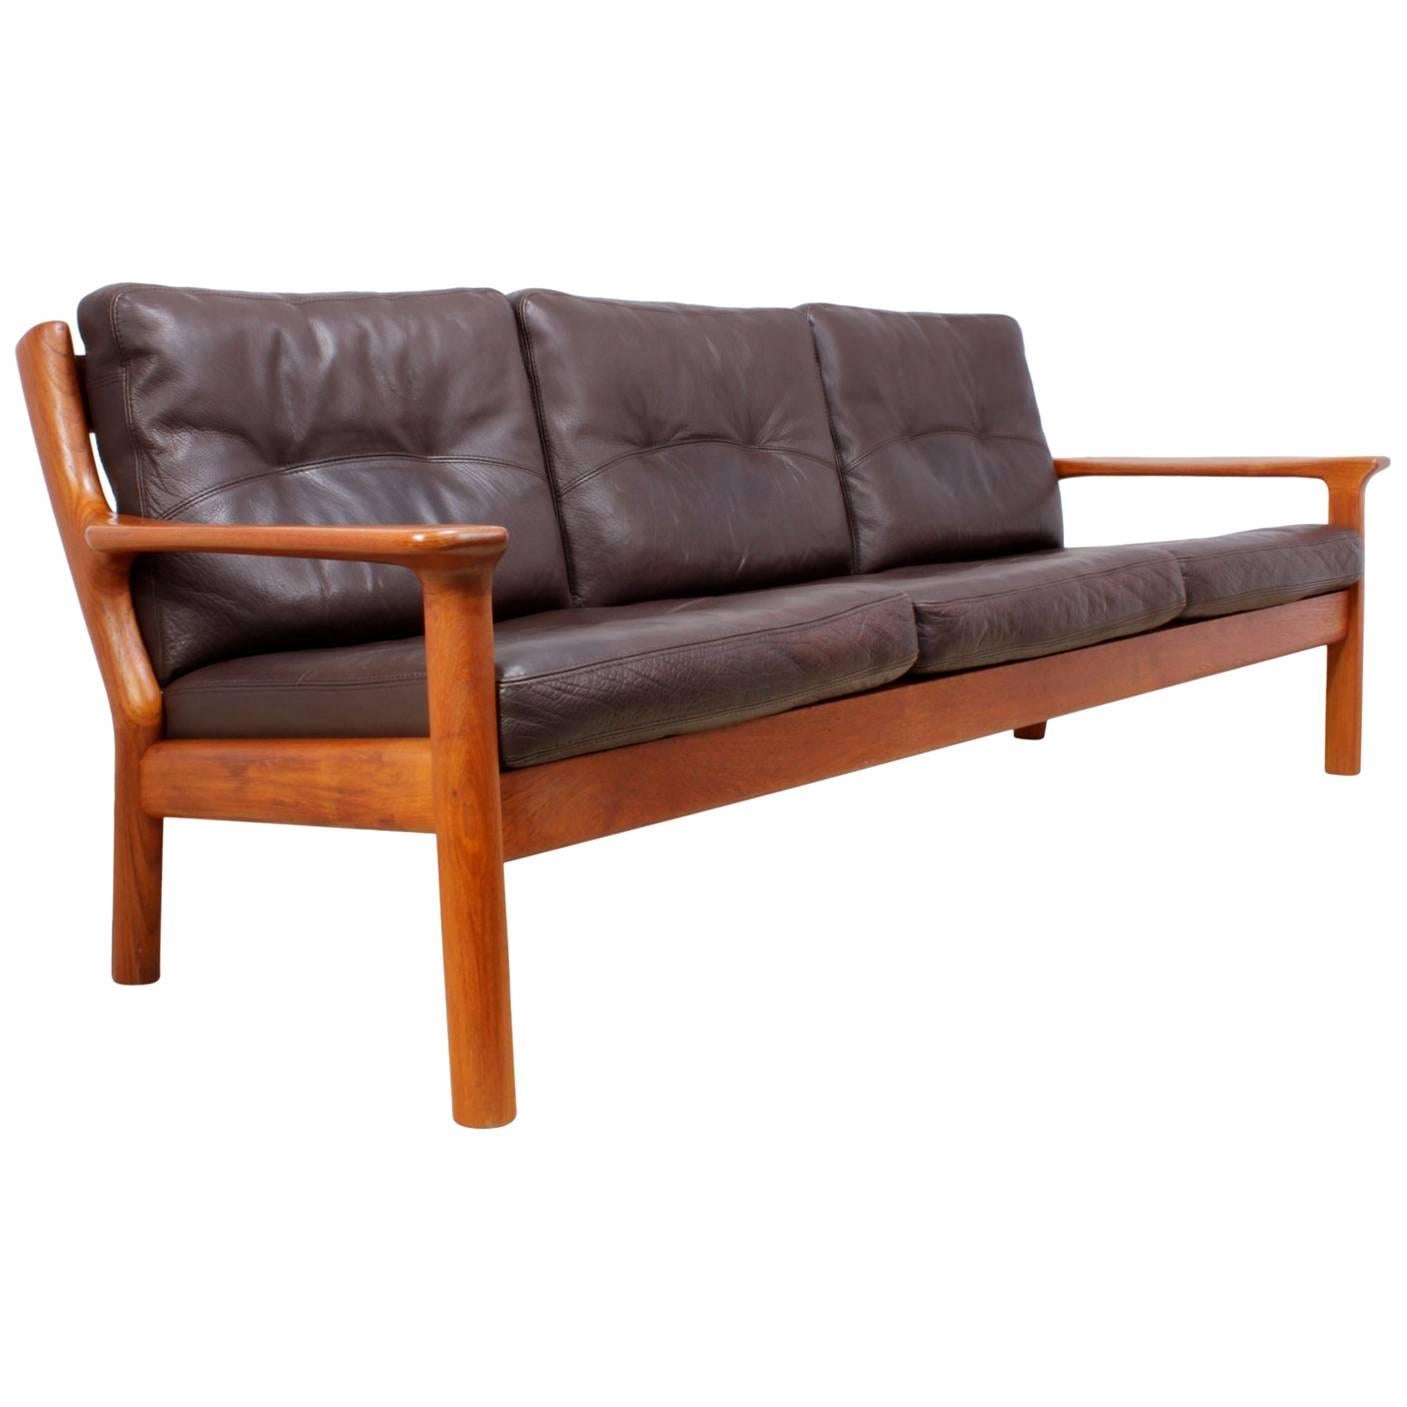 Midcentury Sofa in Teak and Leather by Glostrop